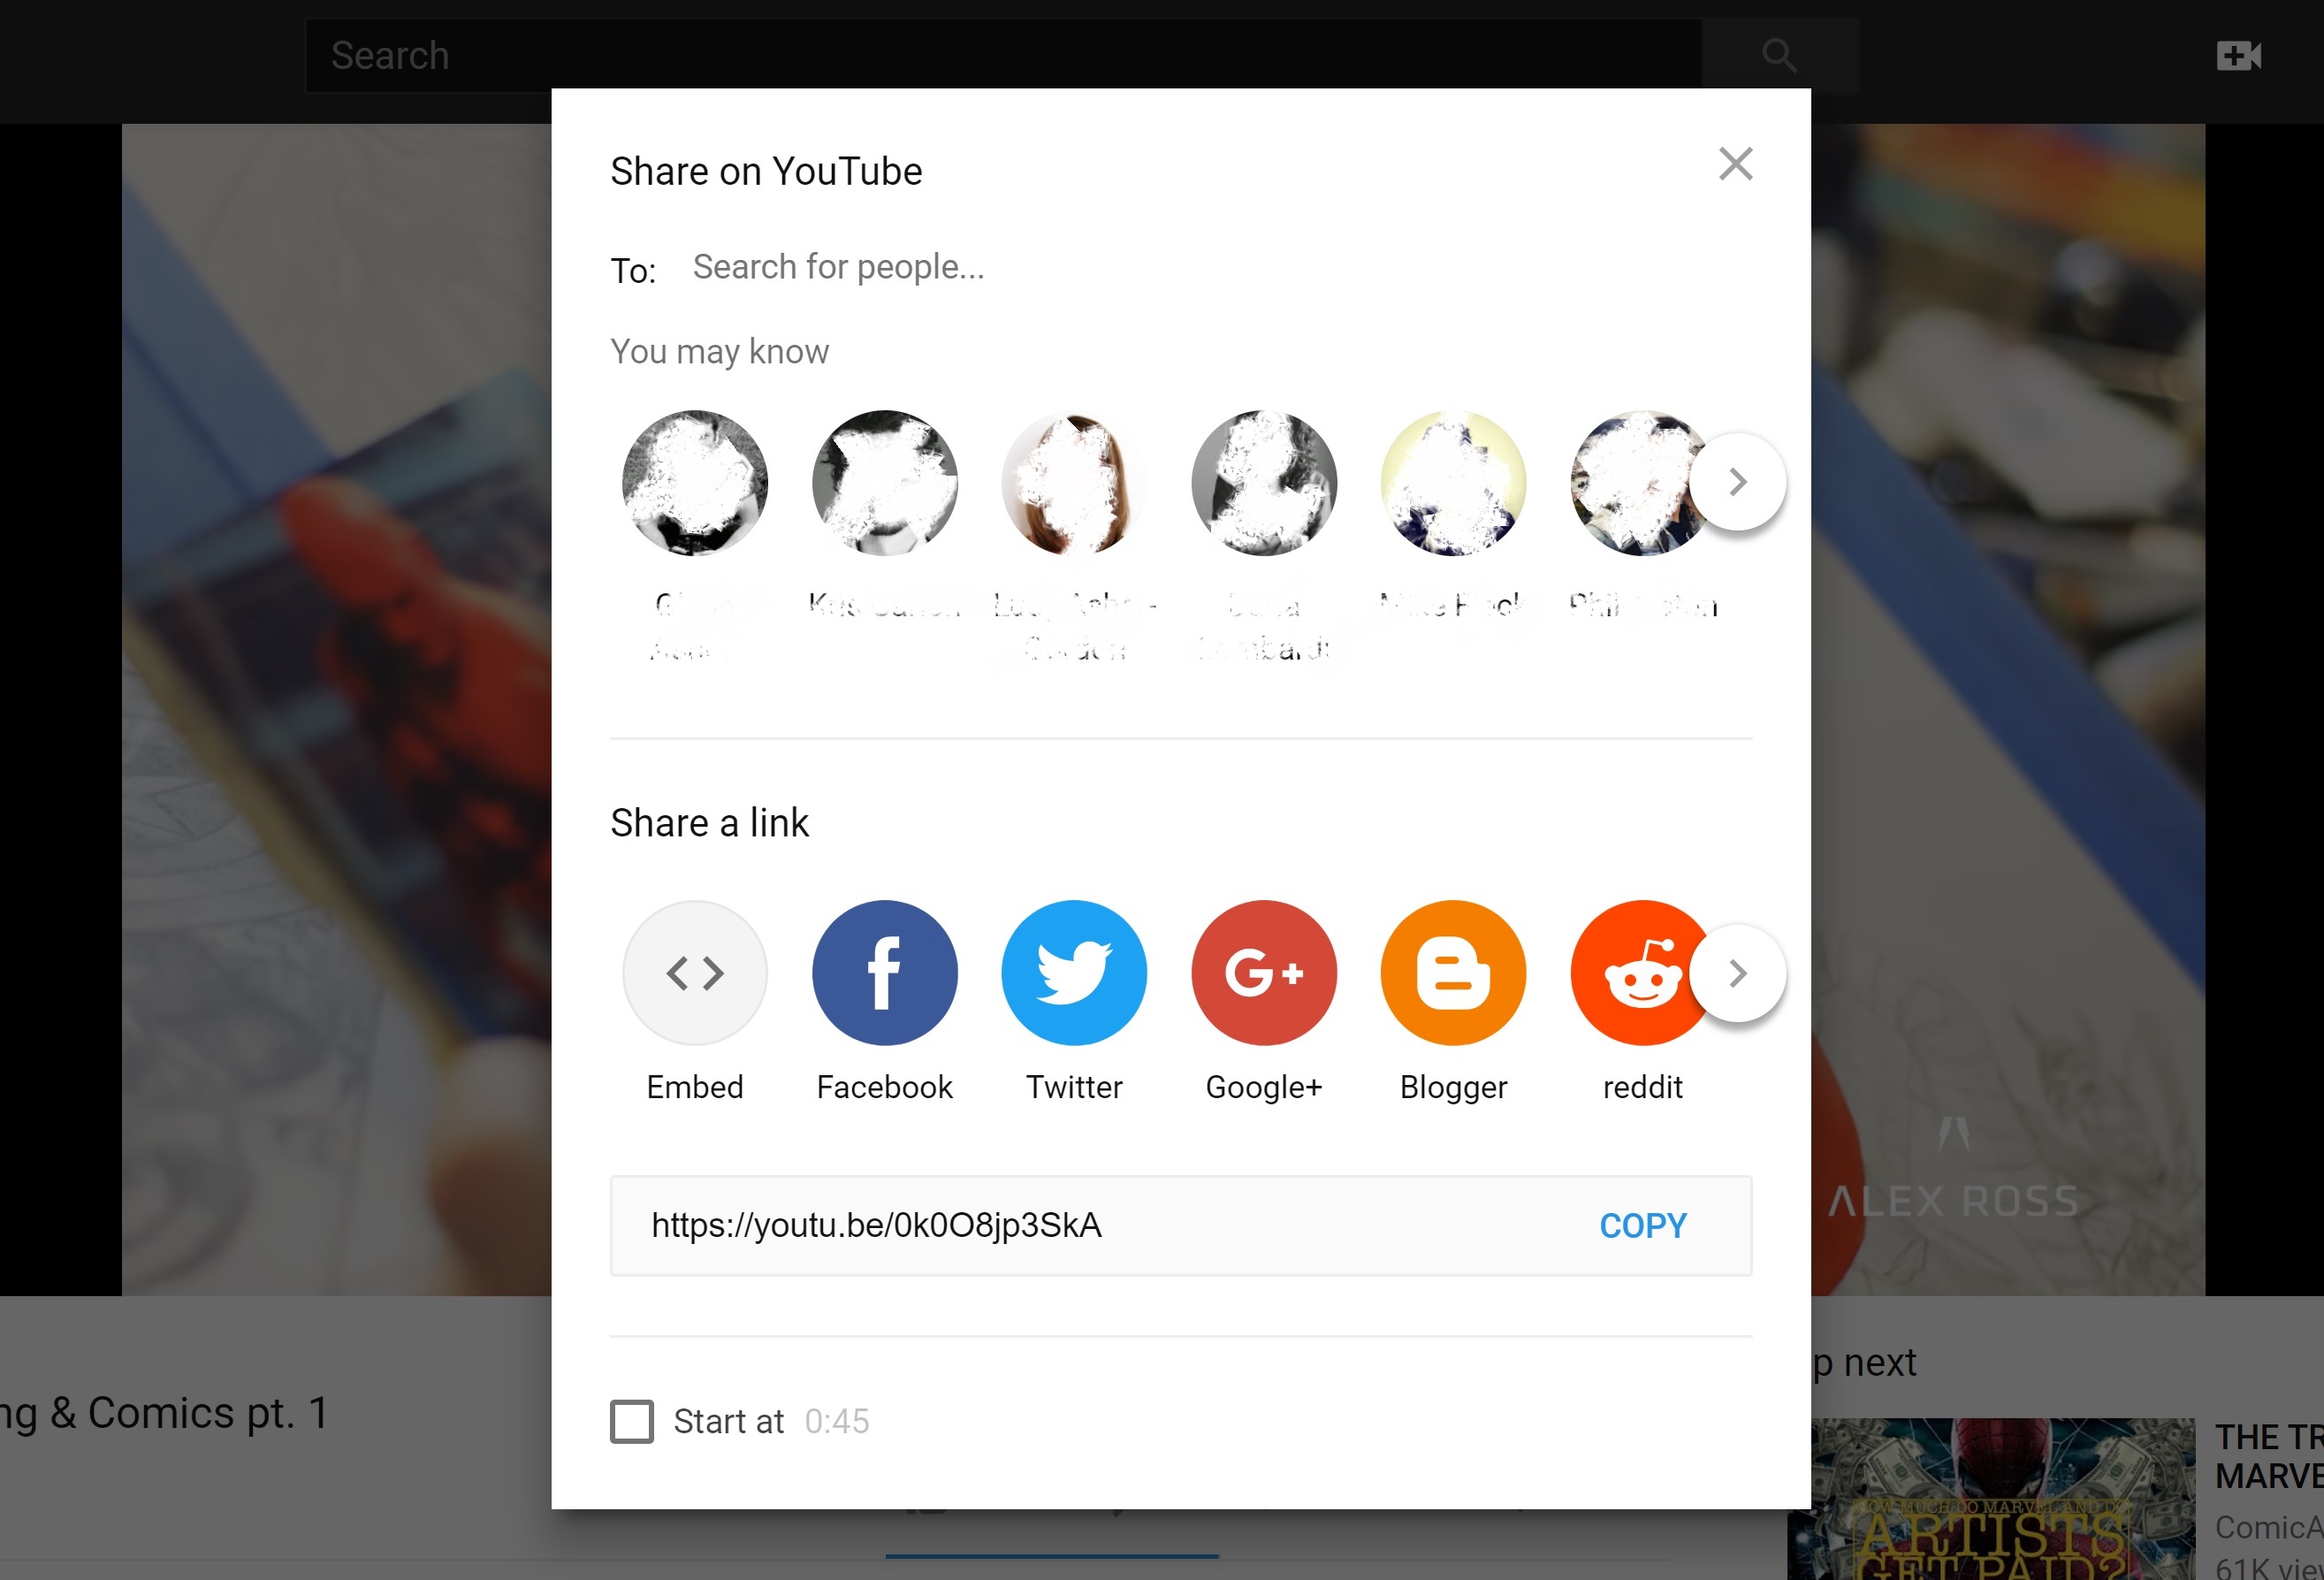 A screenshot of the new YouTube sharing interface on desktop.